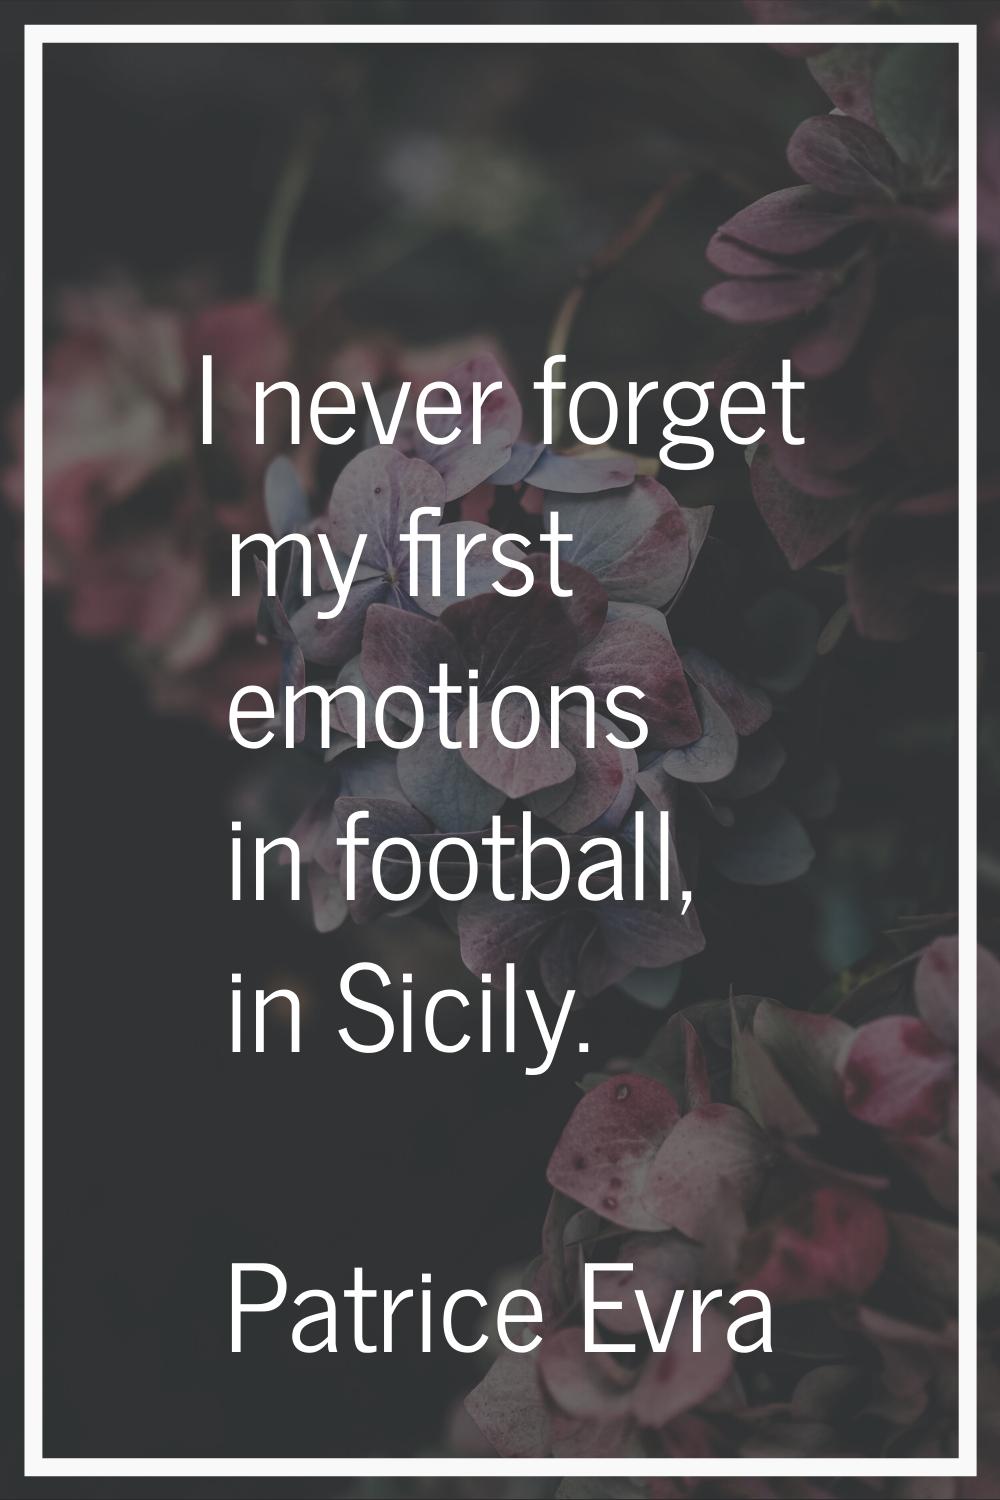 I never forget my first emotions in football, in Sicily.